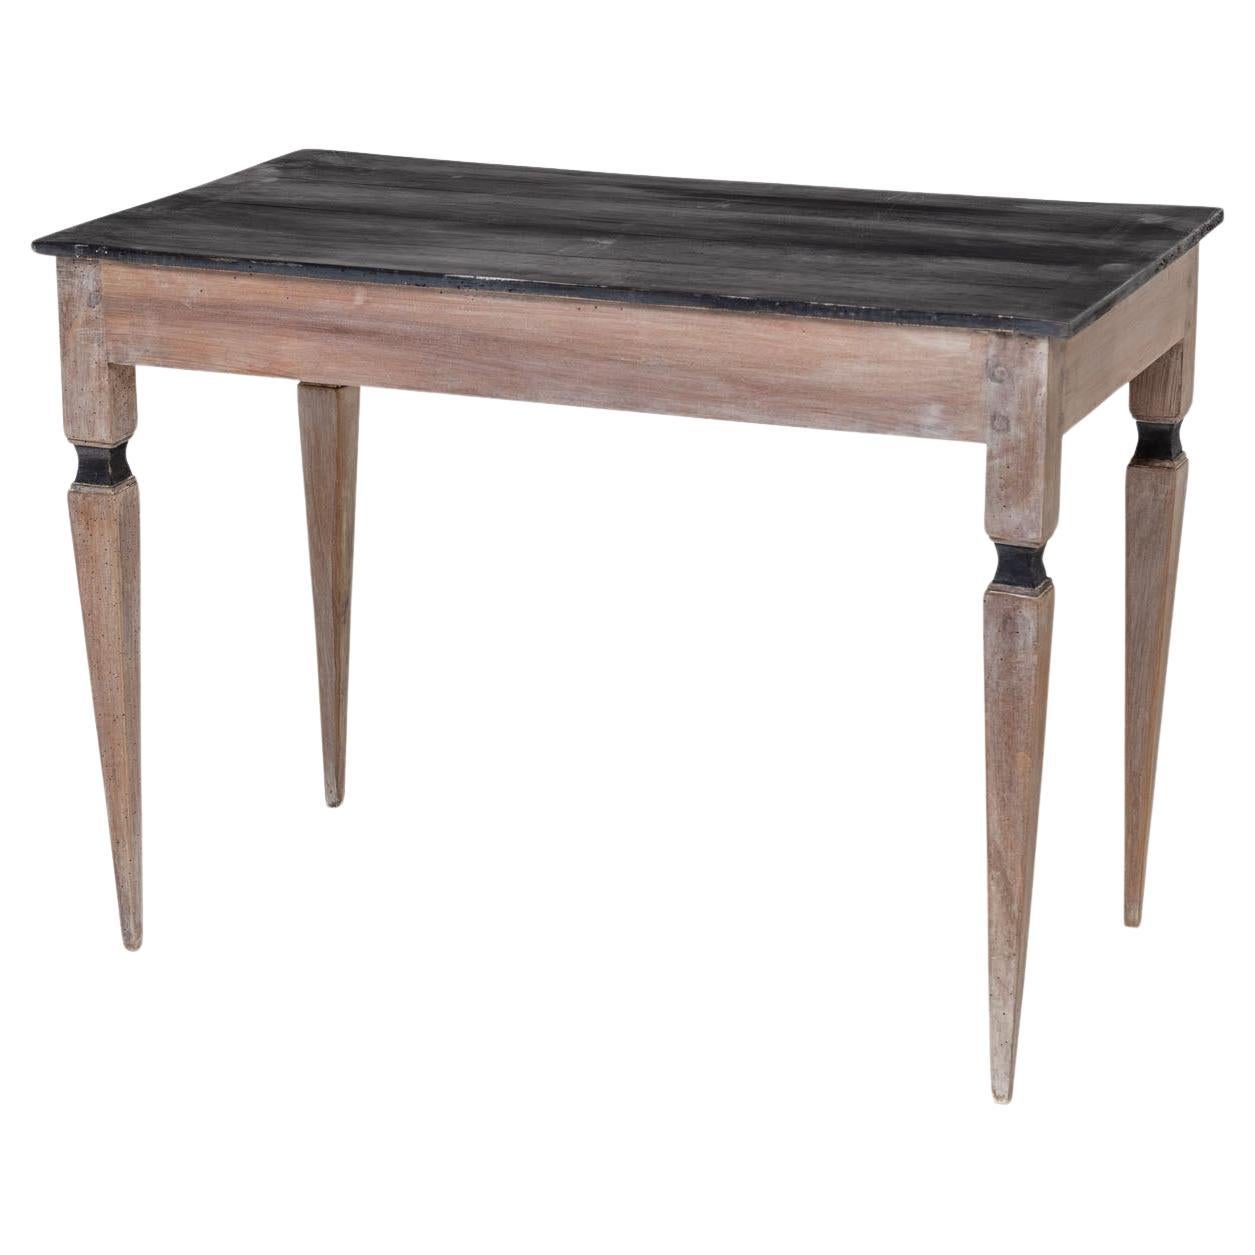 Small desk on high square legs with rectangular black table top and one drawer. The painting of the table is new and was then given an antique patina.